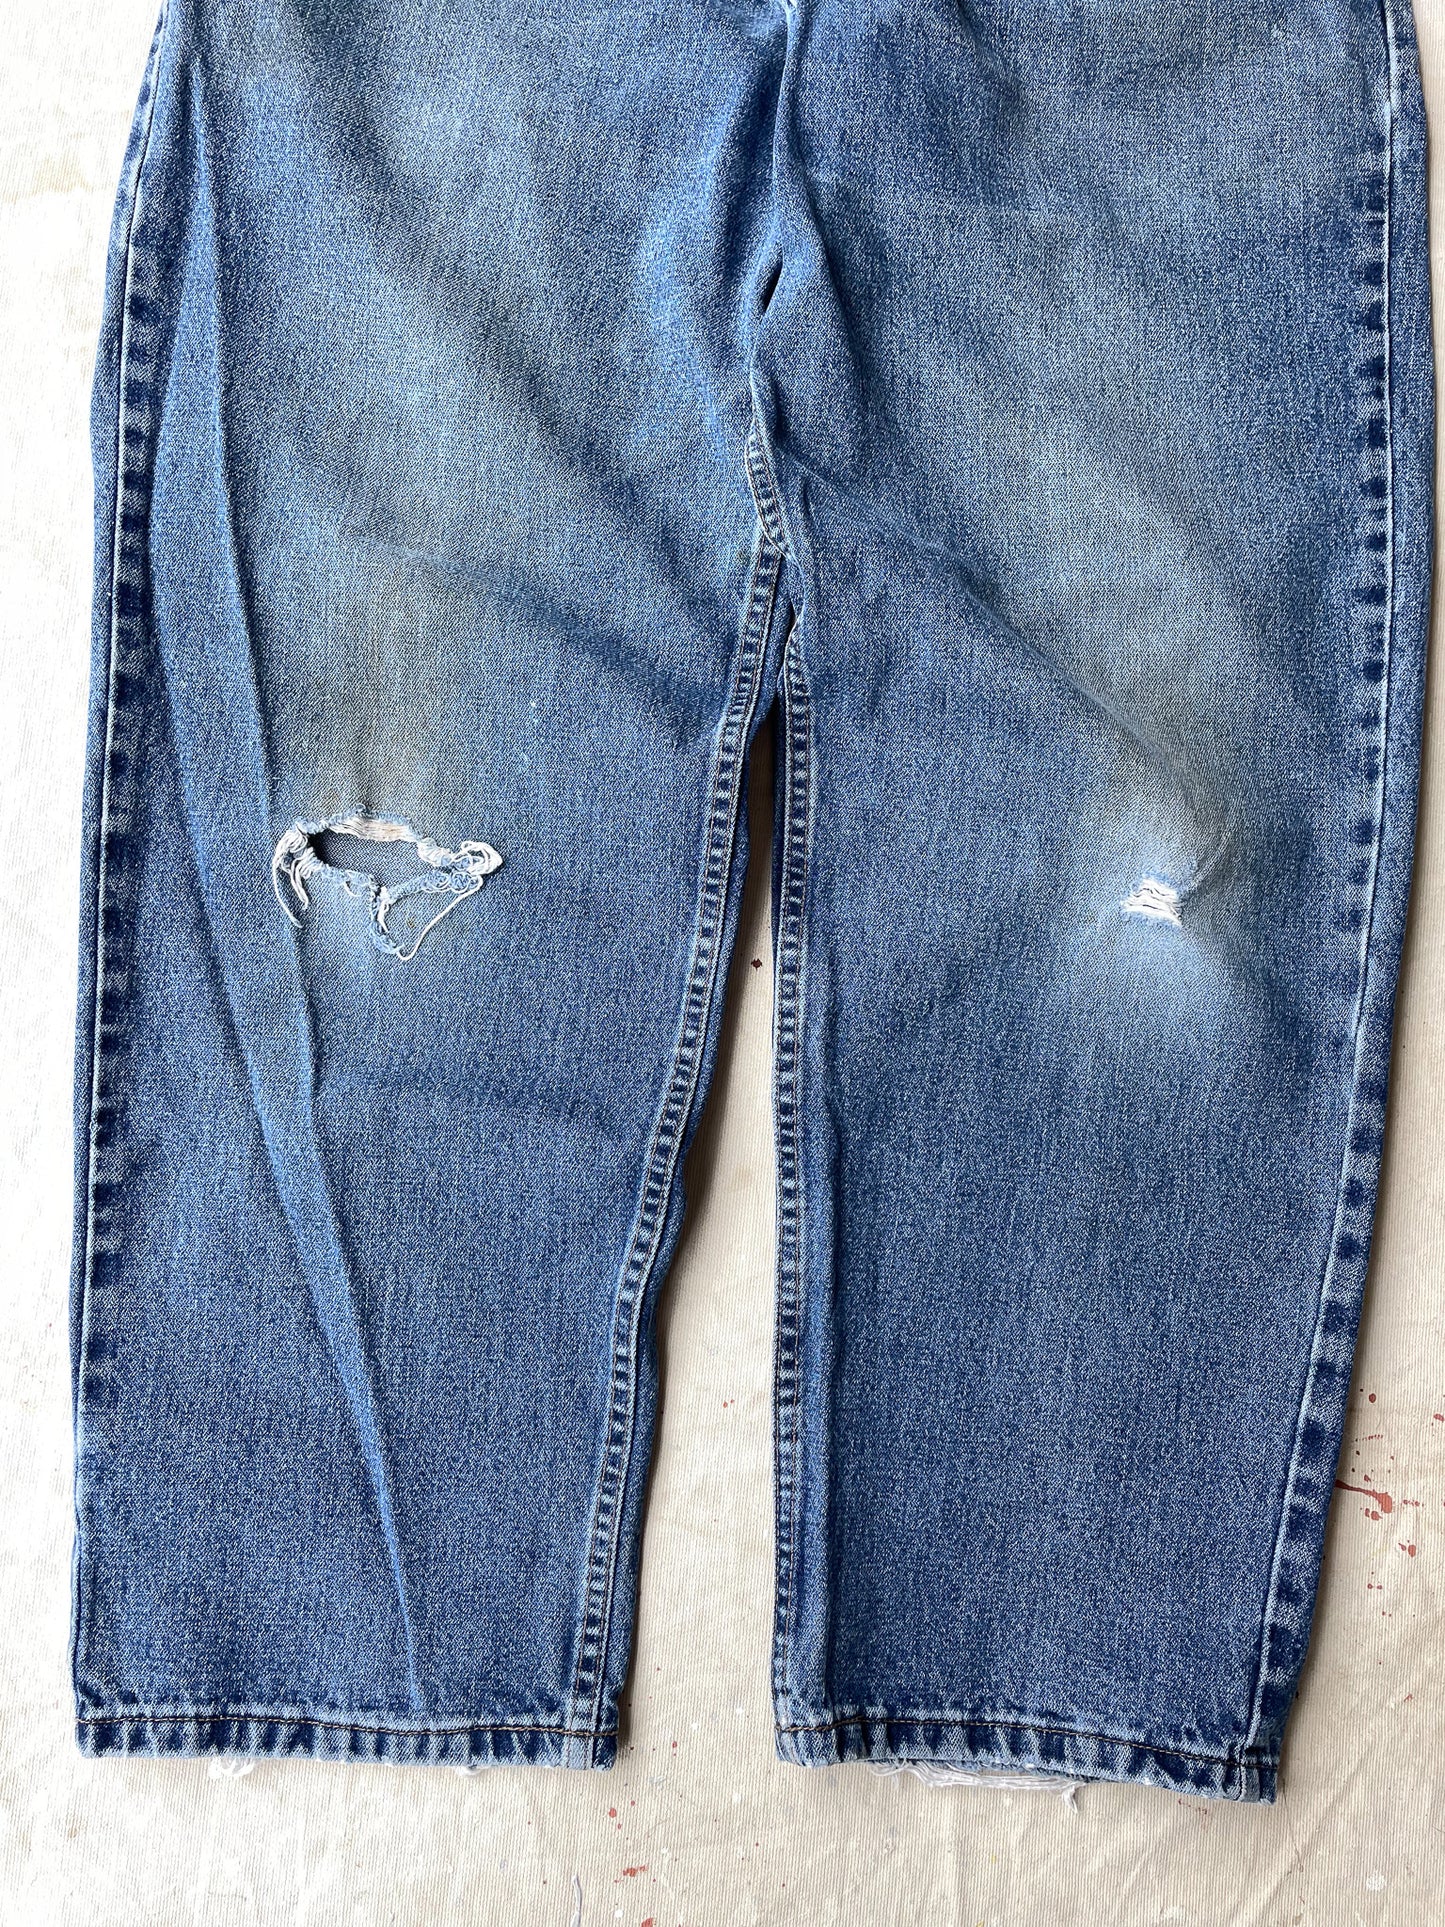 90's Levi's Silvertab Ripped Baggy Jeans—[36X32]